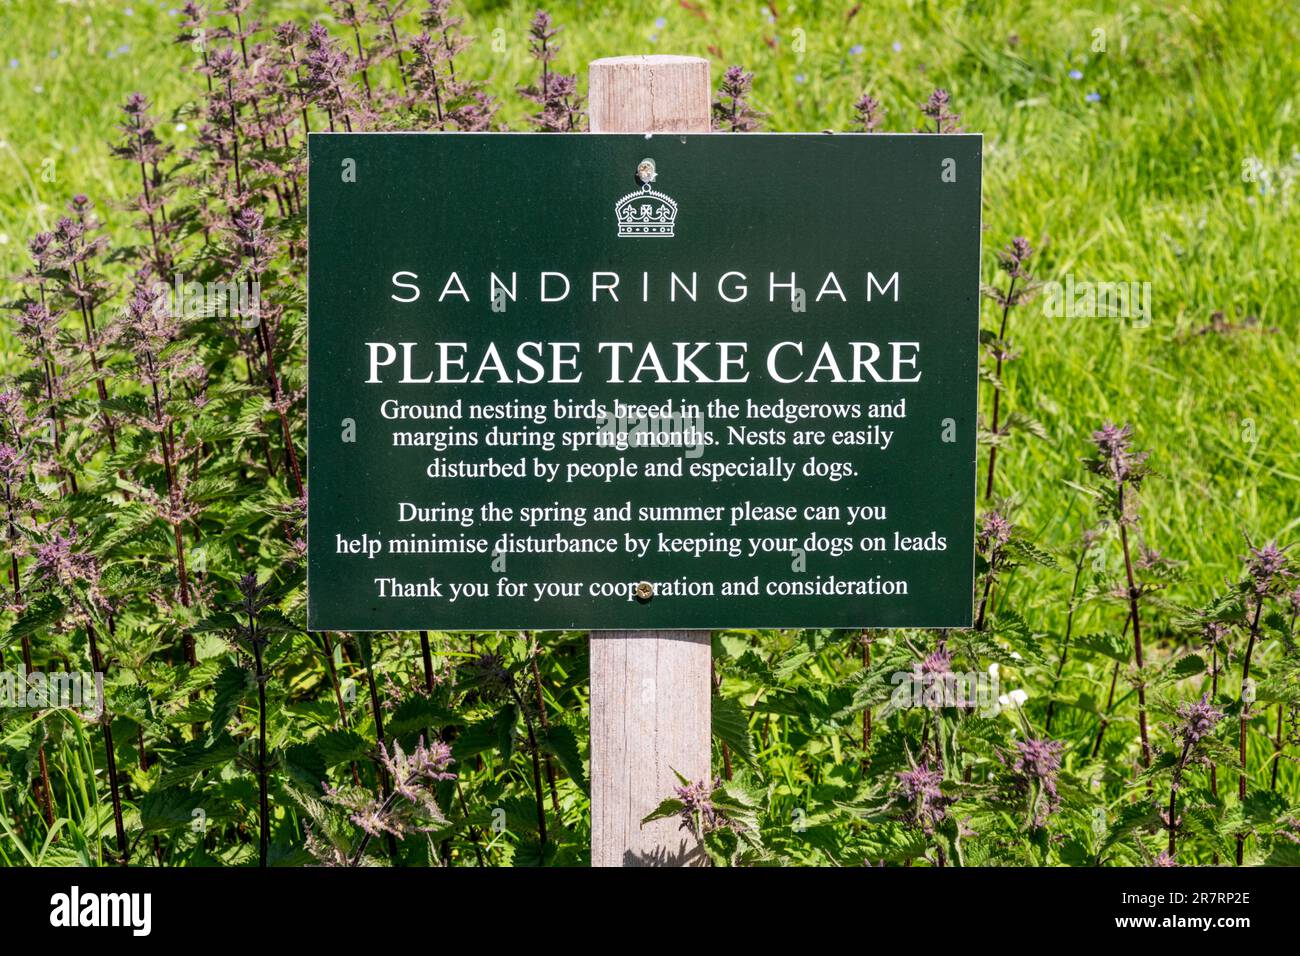 A sign on the Sandringham estate warns of ground-nesting birds in hedgerows & field margins and asks people to keep dogs on leads. Stock Photo